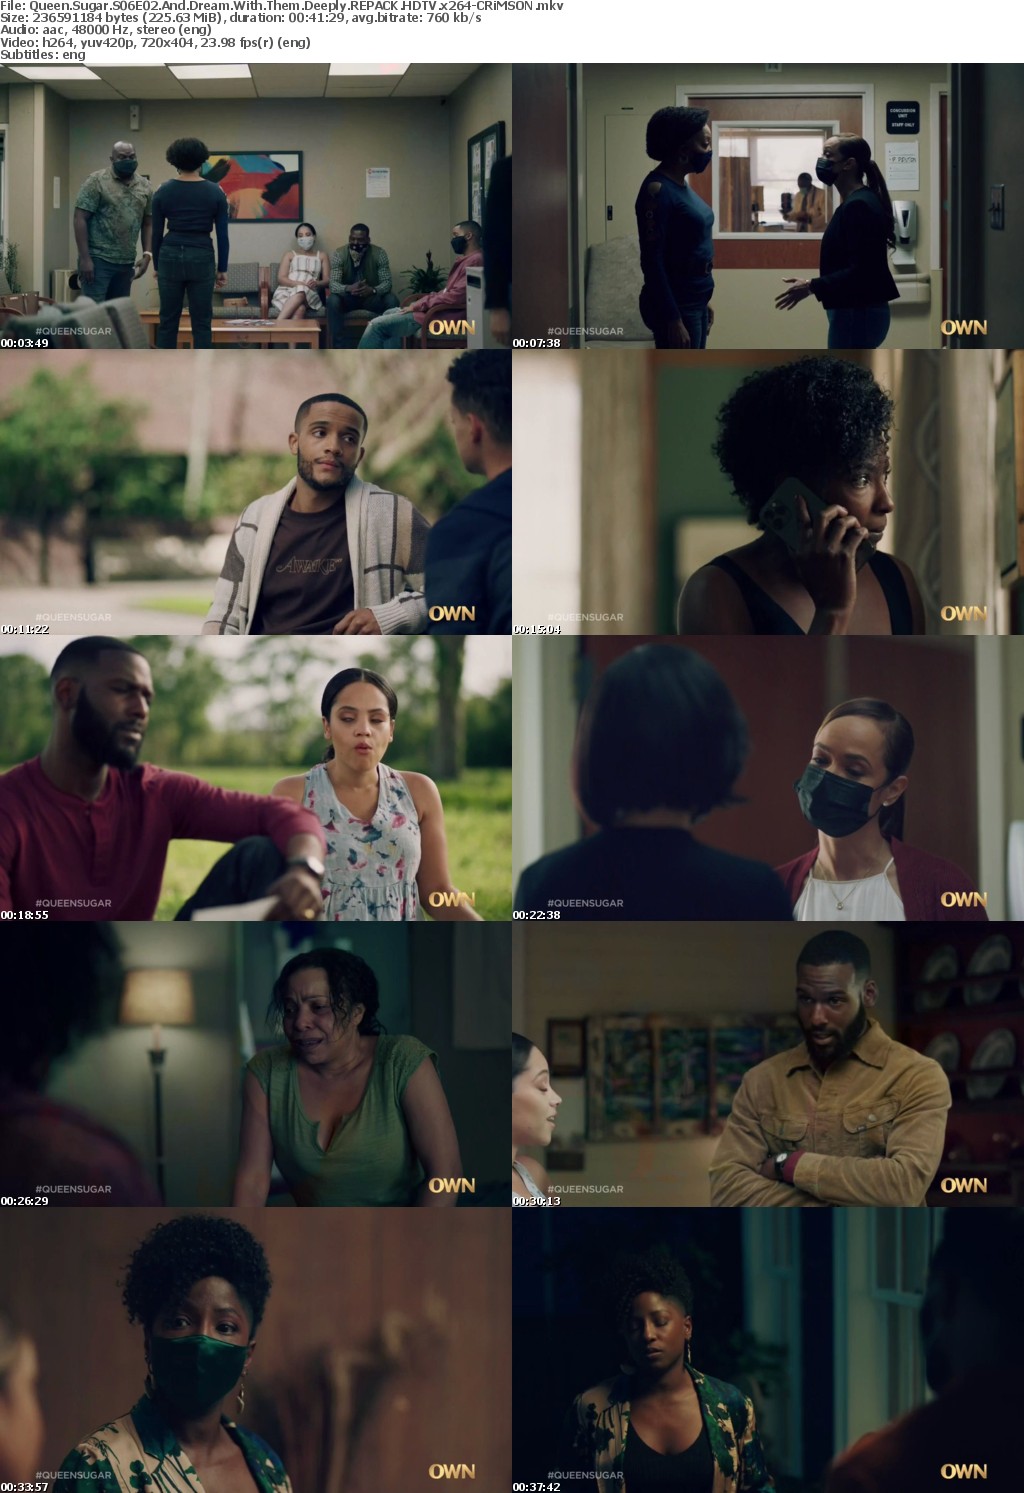 Queen Sugar S06E02 And Dream With Them Deeply REPACK HDTV x264-CRiMSON